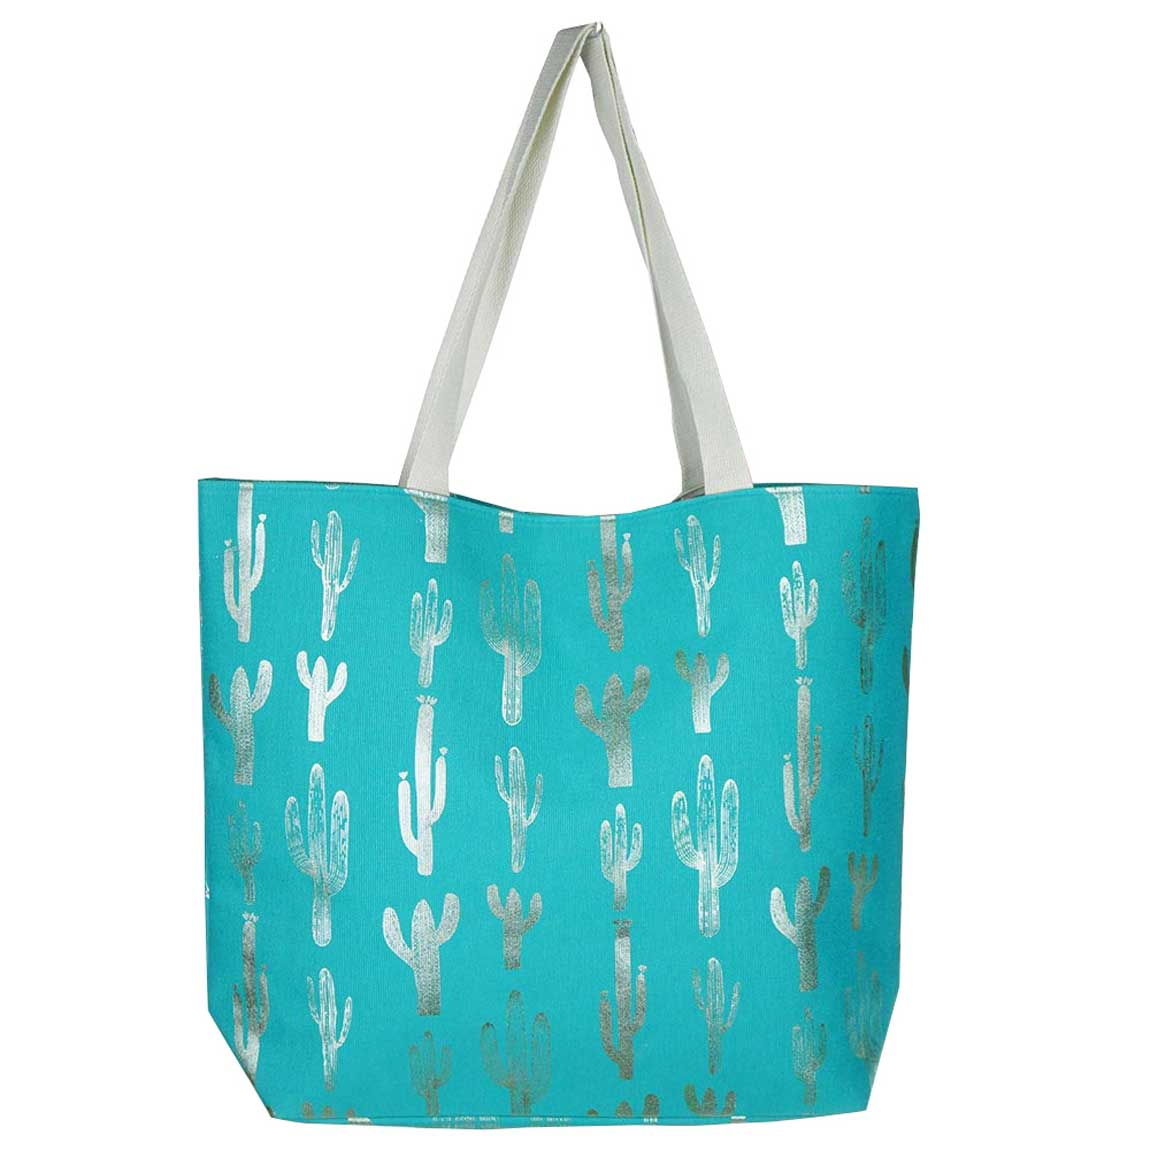 Mint Cactus Foil Beach Bag, Show your trendy side with this awesome cactus print beach tote bag. Spacious enough for carrying any and all of your seaside essentials. The soft rope straps really helps carrying this shoulder bag comfortably. Folds flat for easy packing. Perfect as a beach bag to carry foods, drinks, big beach blanket, towels, swimsuit, toys, flip flops, sun screen and more.